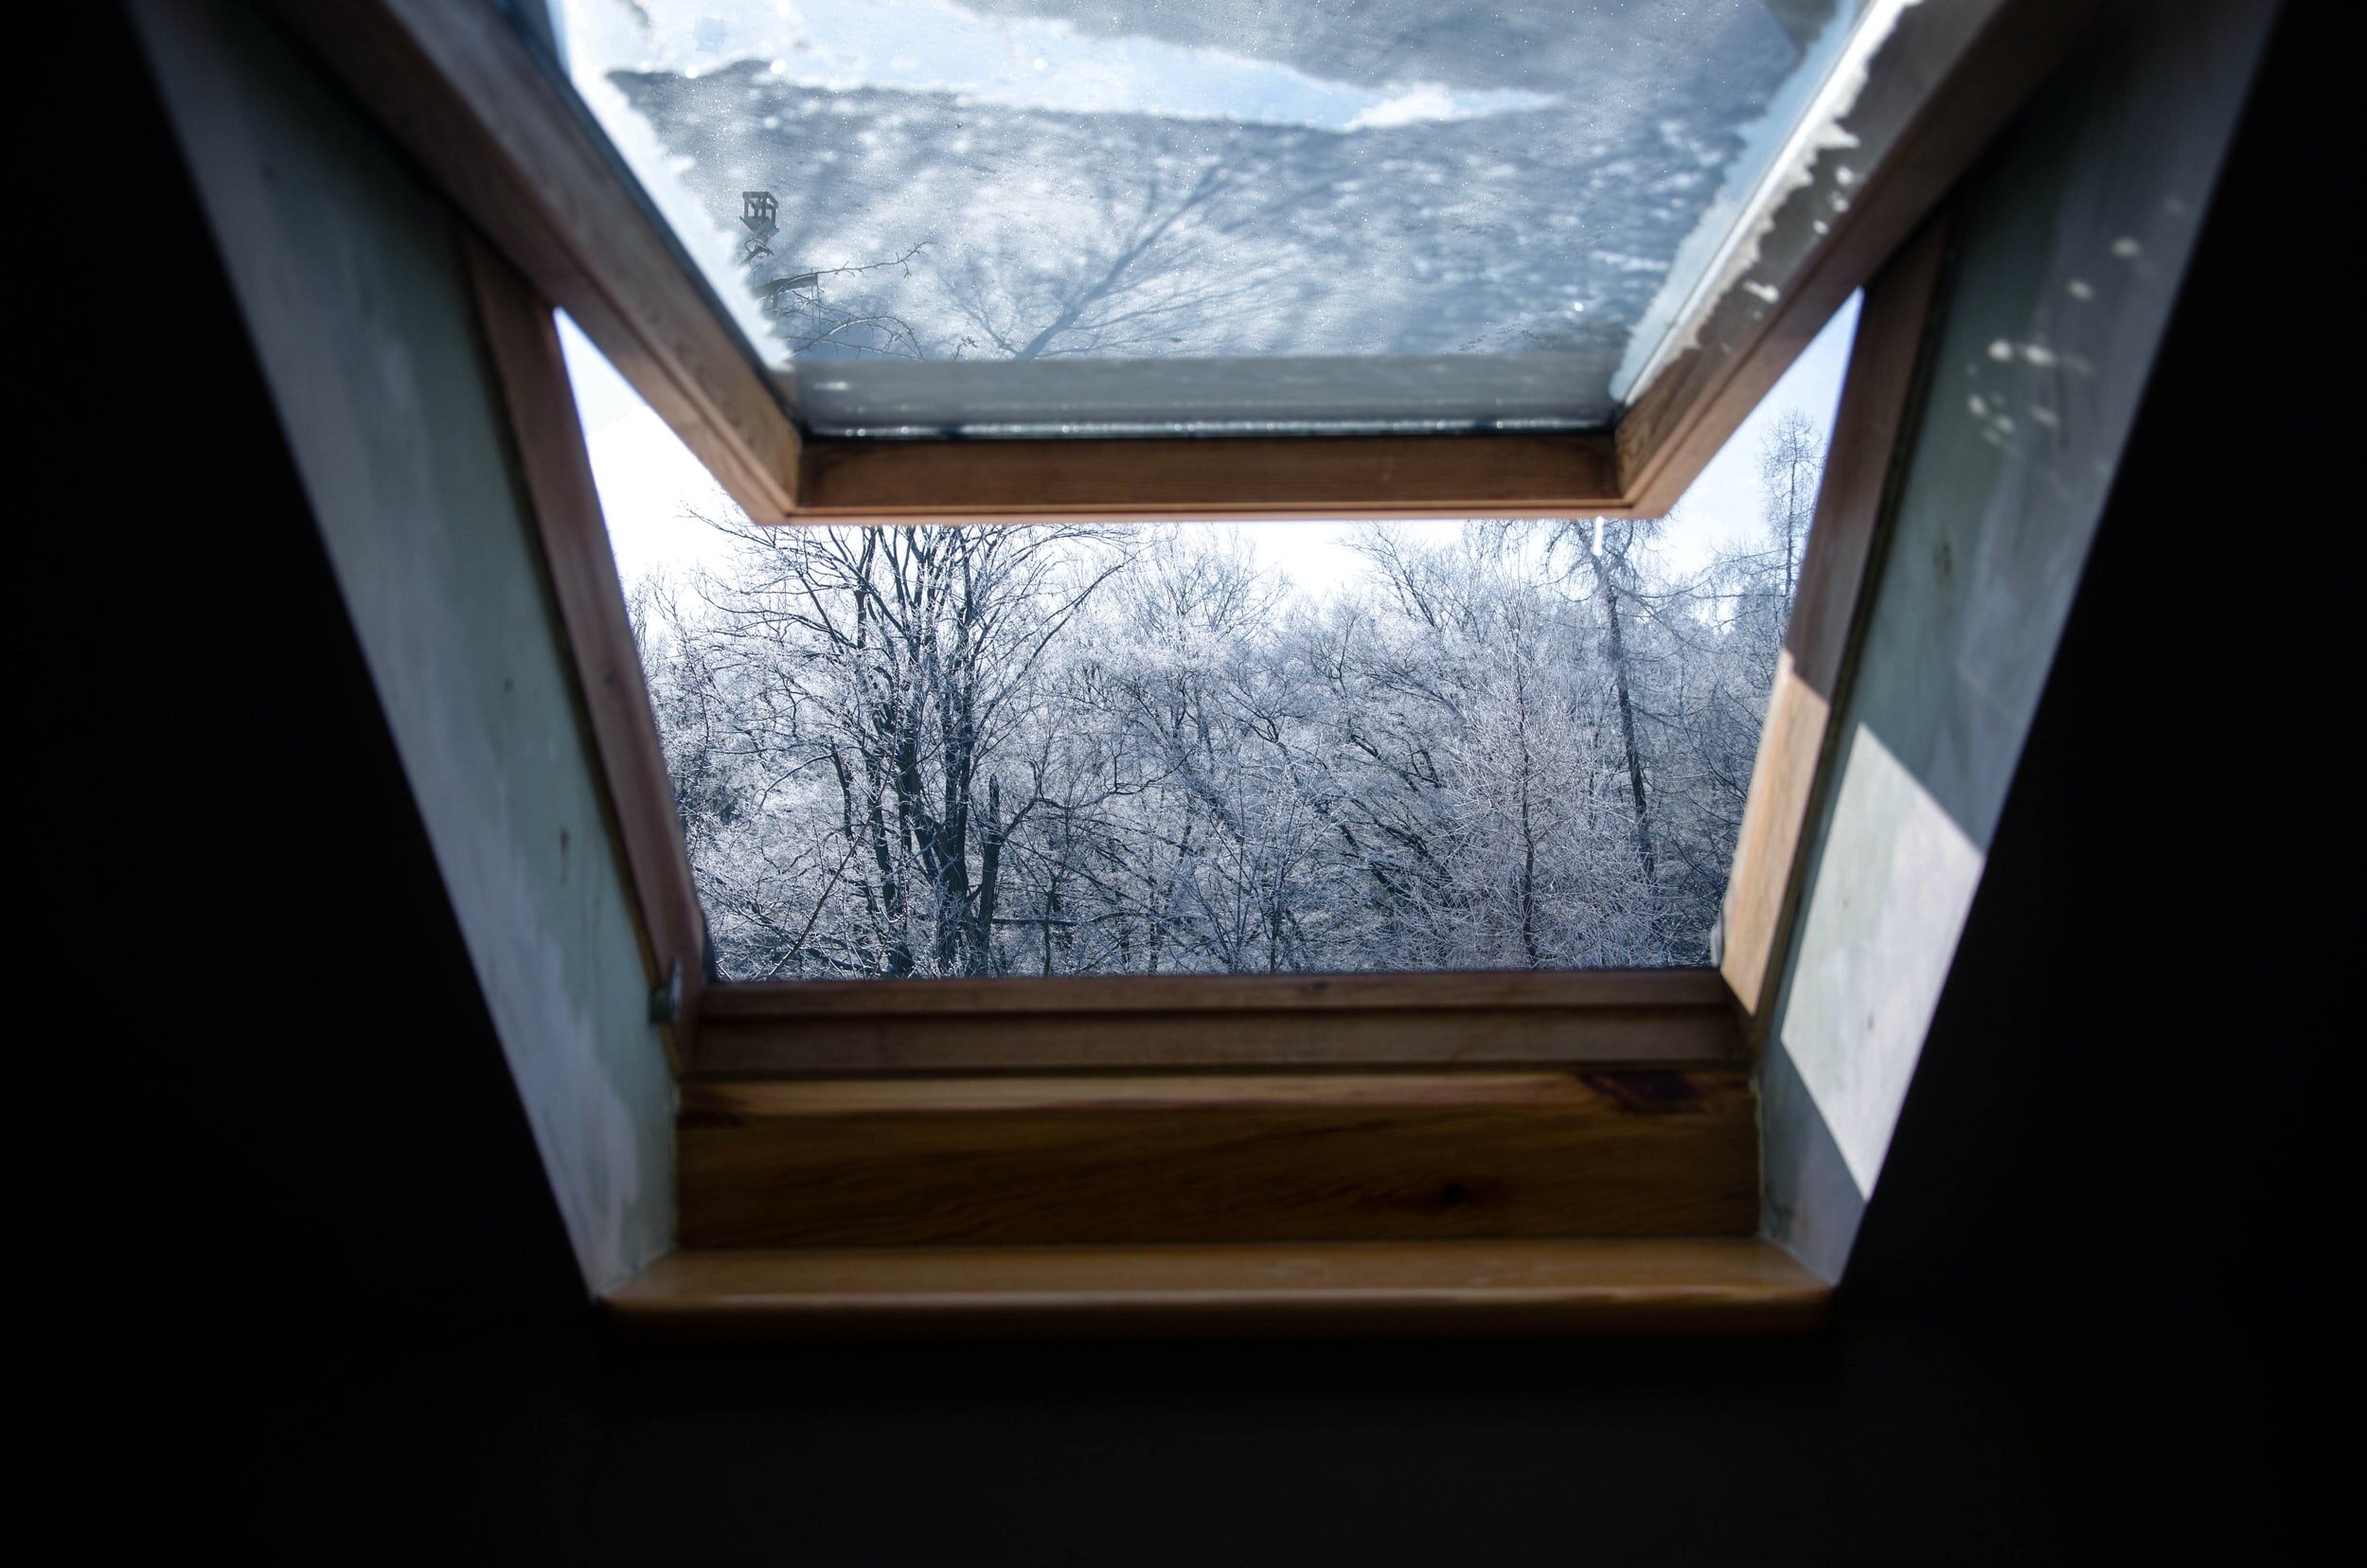 Skylights and other roof penetrations can be an area to check for leaks.